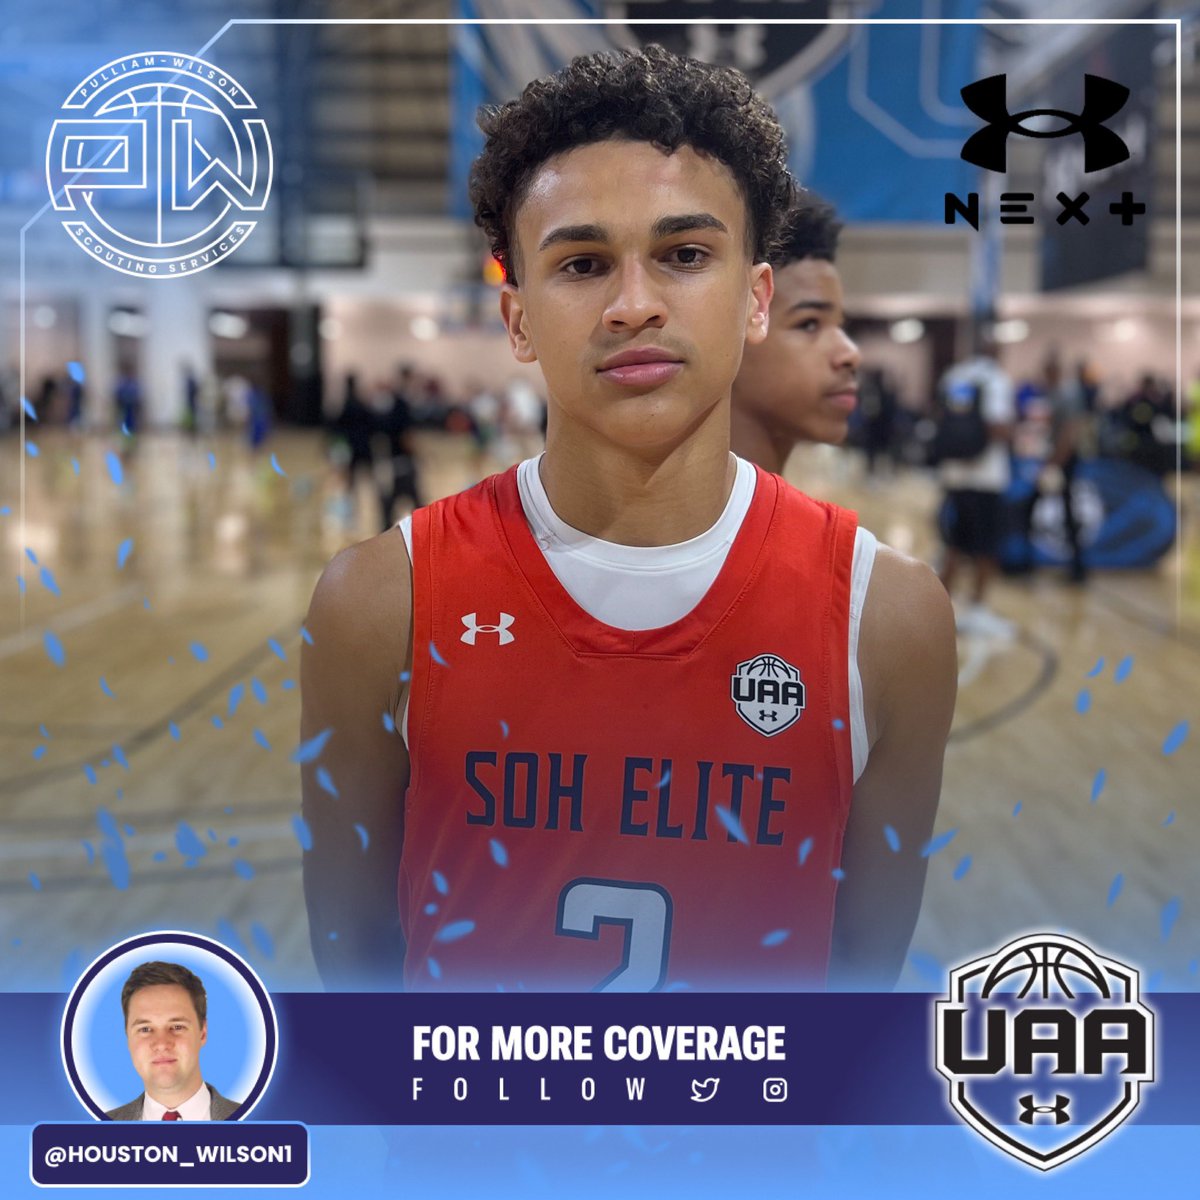 2028 Tai Bell of @soh_elite was arguably the top underclassmen this past weekend in Rock Hill at the @UANextBHoops Session 1. Advanced skill set and showed off some really nice facilitating. Fit right in 15U